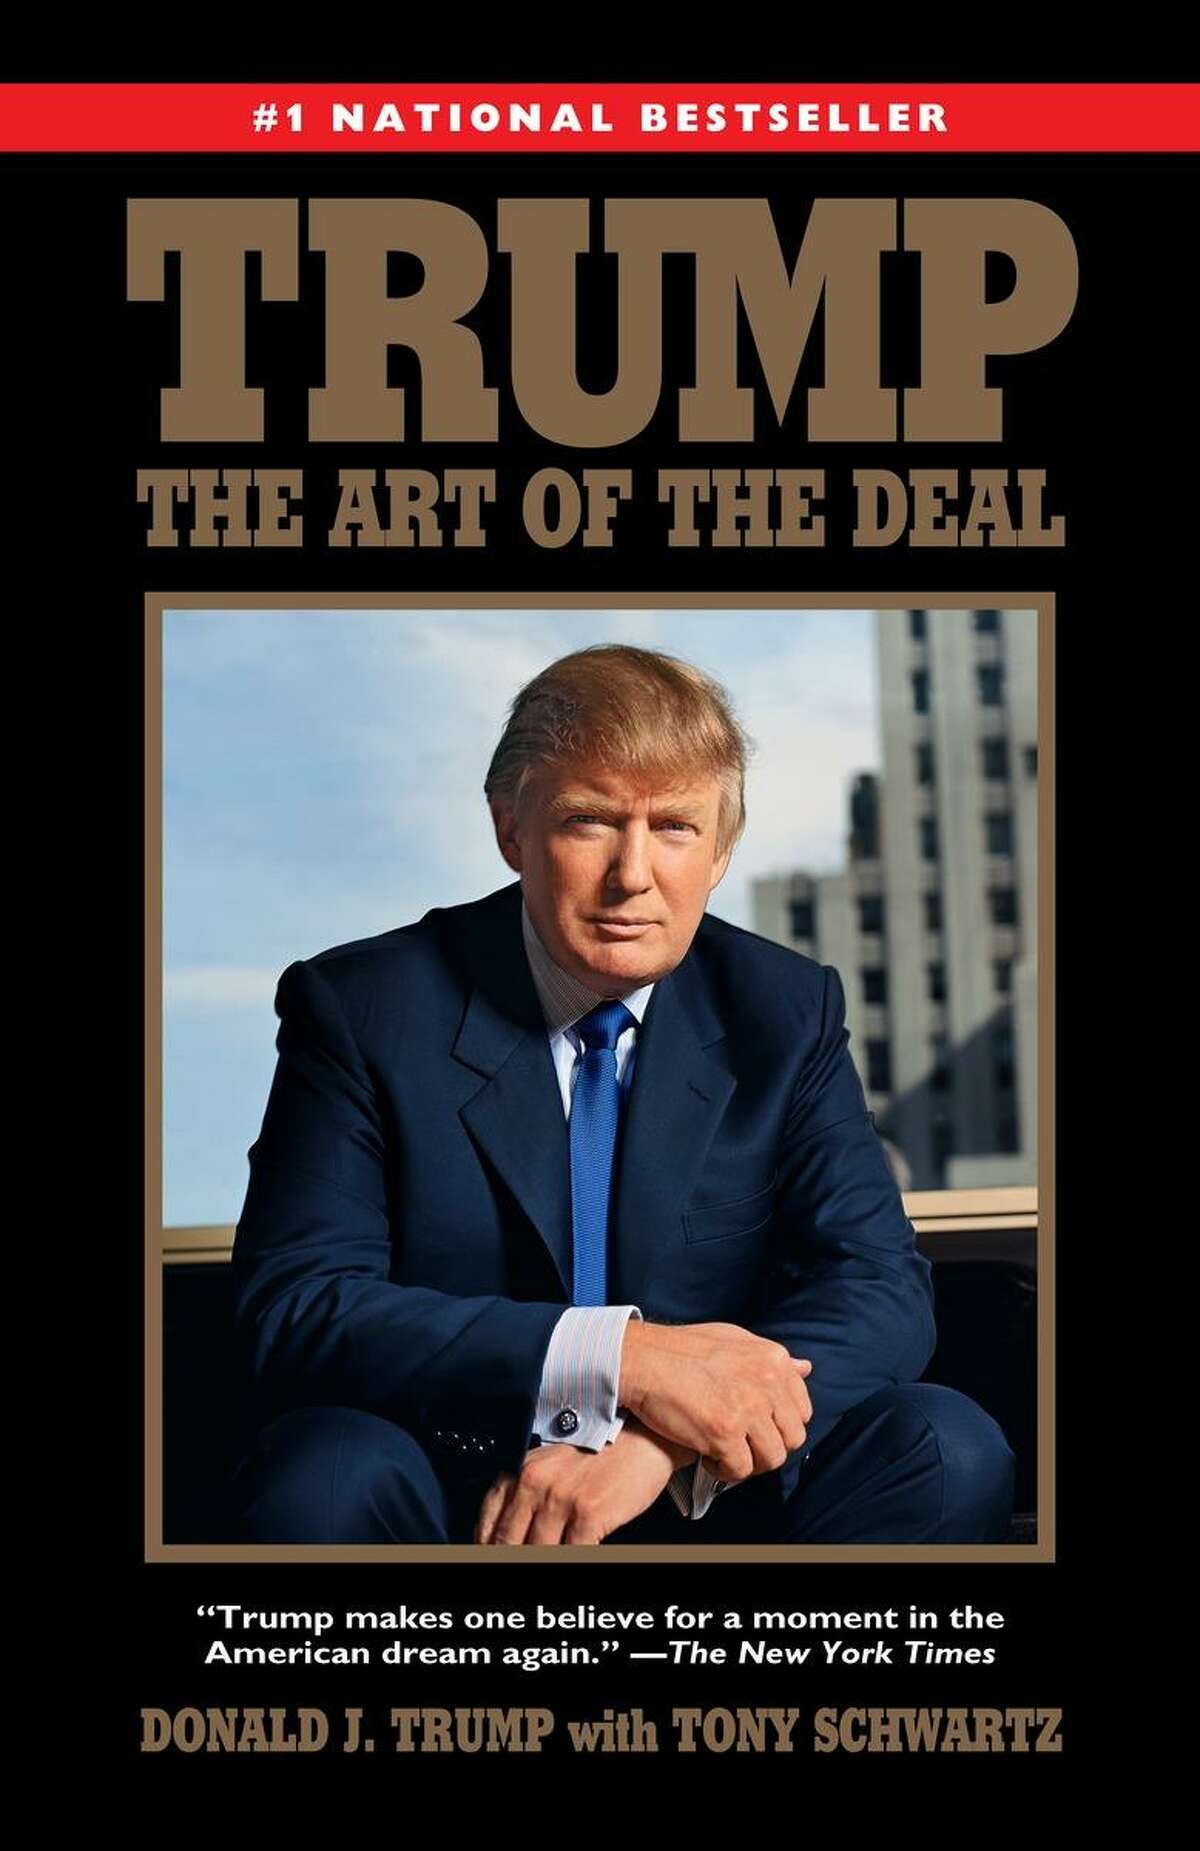 “Trump: The Art of the Deal,” by Donald Trump with Tony Schwartz, was a memoir/manifesto dedicated to a life of big-time negotiating. A reader says the “art of the deal” is not so much about negotiating as it is about skirting the law.